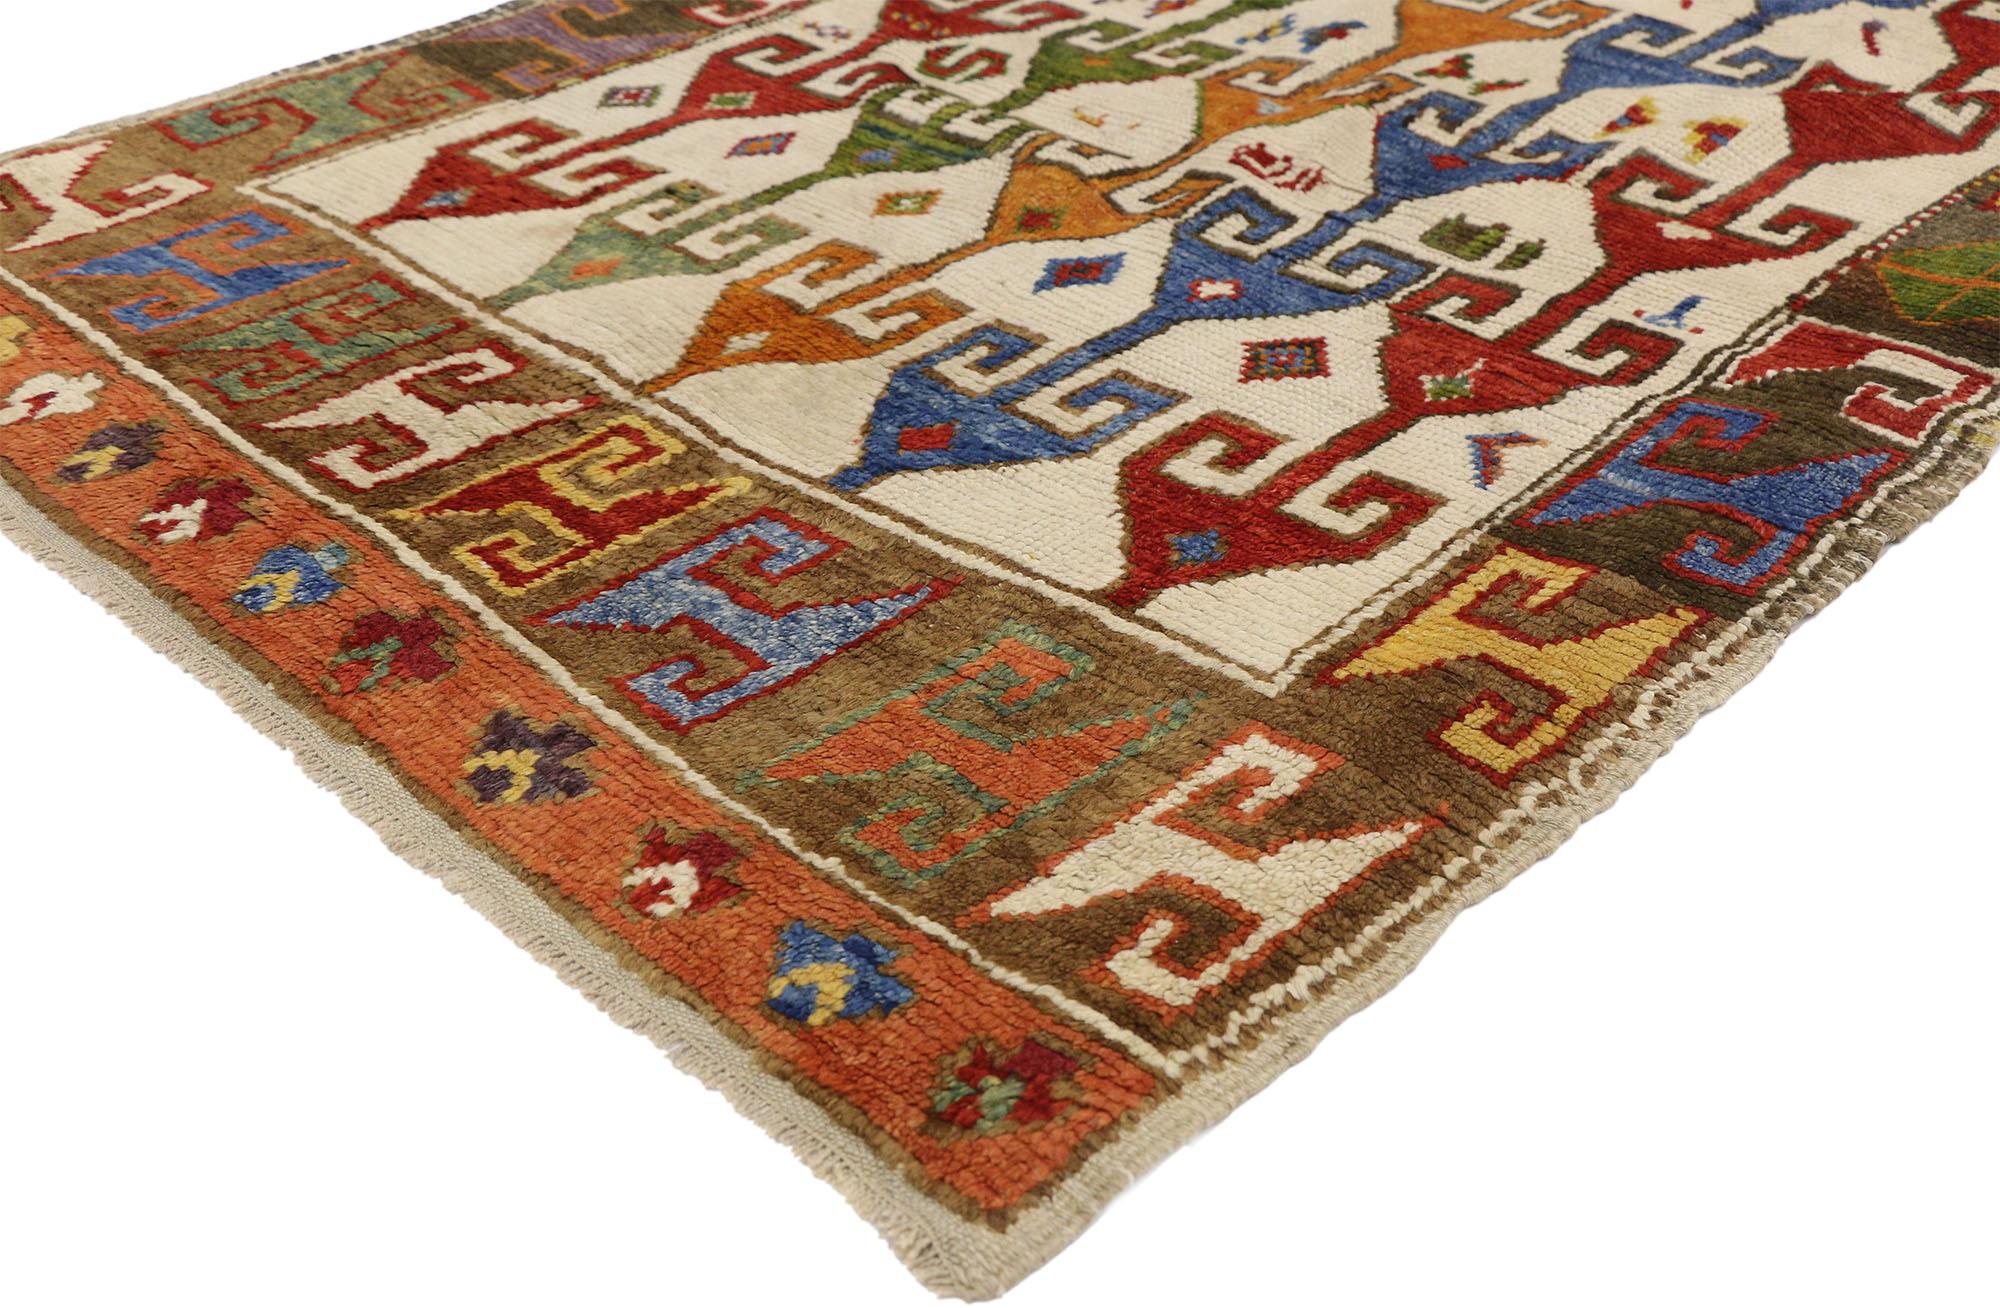 52448, vintage Turkish Oushak rug with Memphis Design style. Bright-hued trees of life motifs ornament the field in this joyful, playful hand knotted wool vintage Turkish Oushak rug with Memphis Design style. Trees of life often represent monotheism